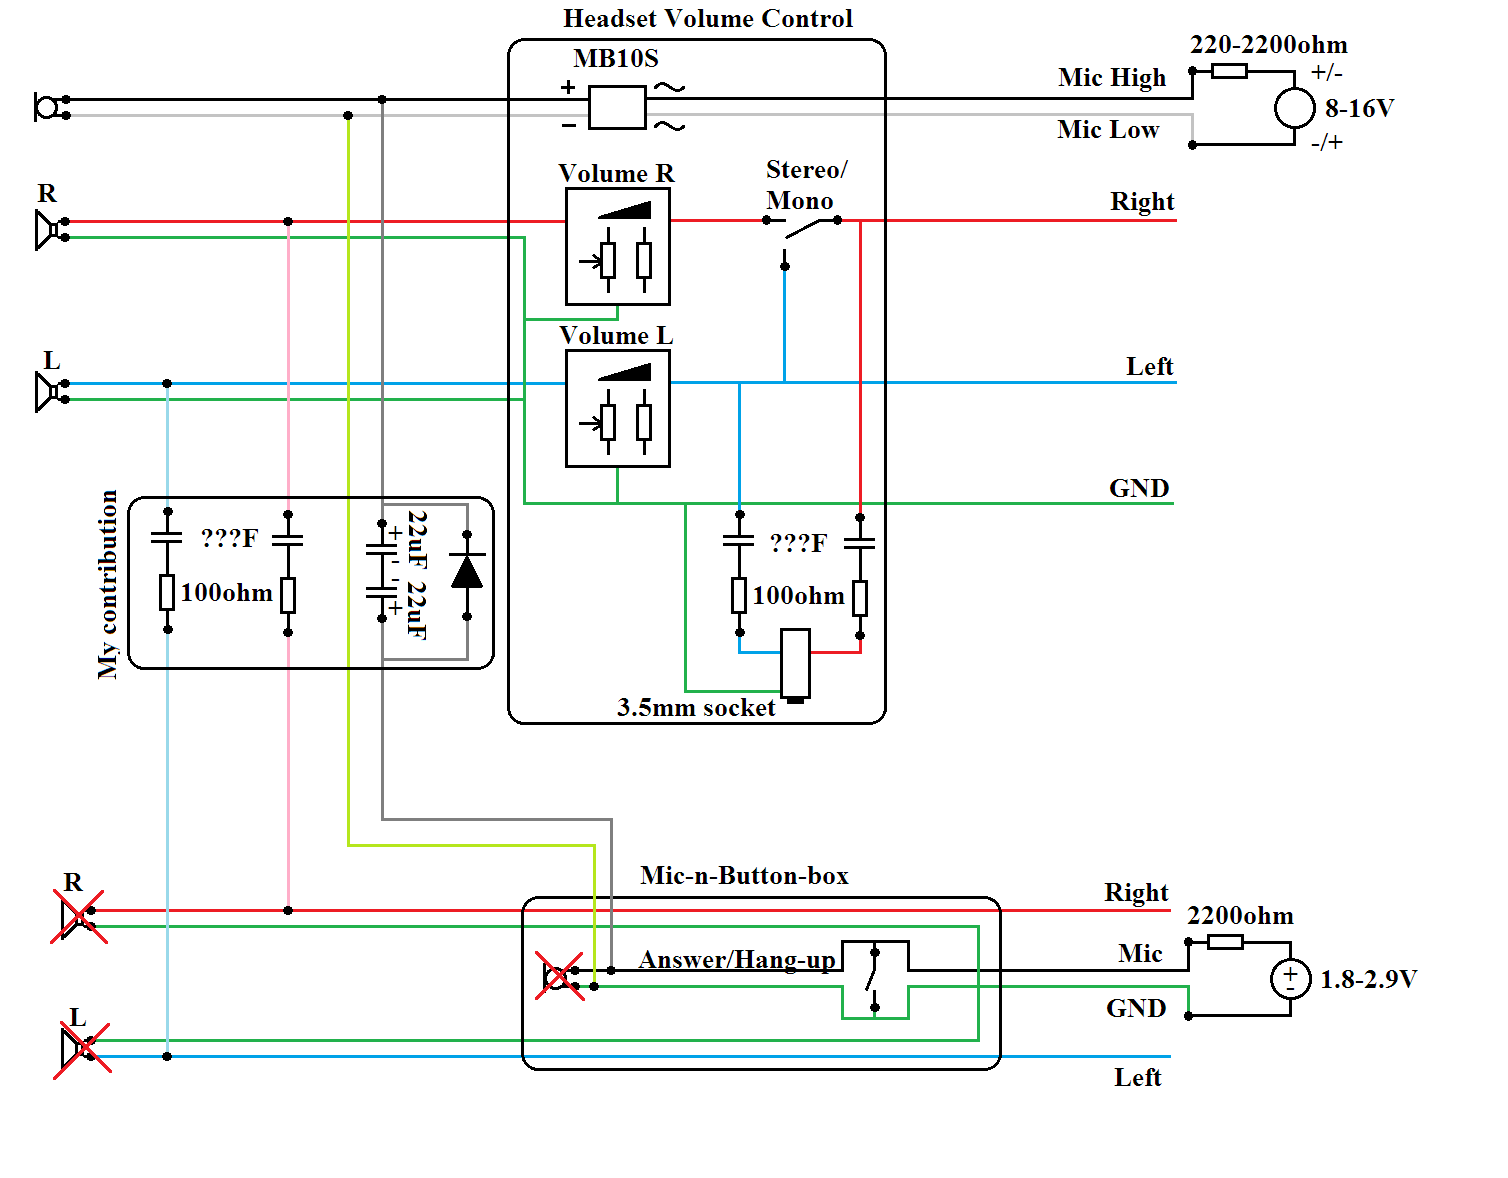 Use aviation headsets with phone | Electronics Forum (Circuits ...